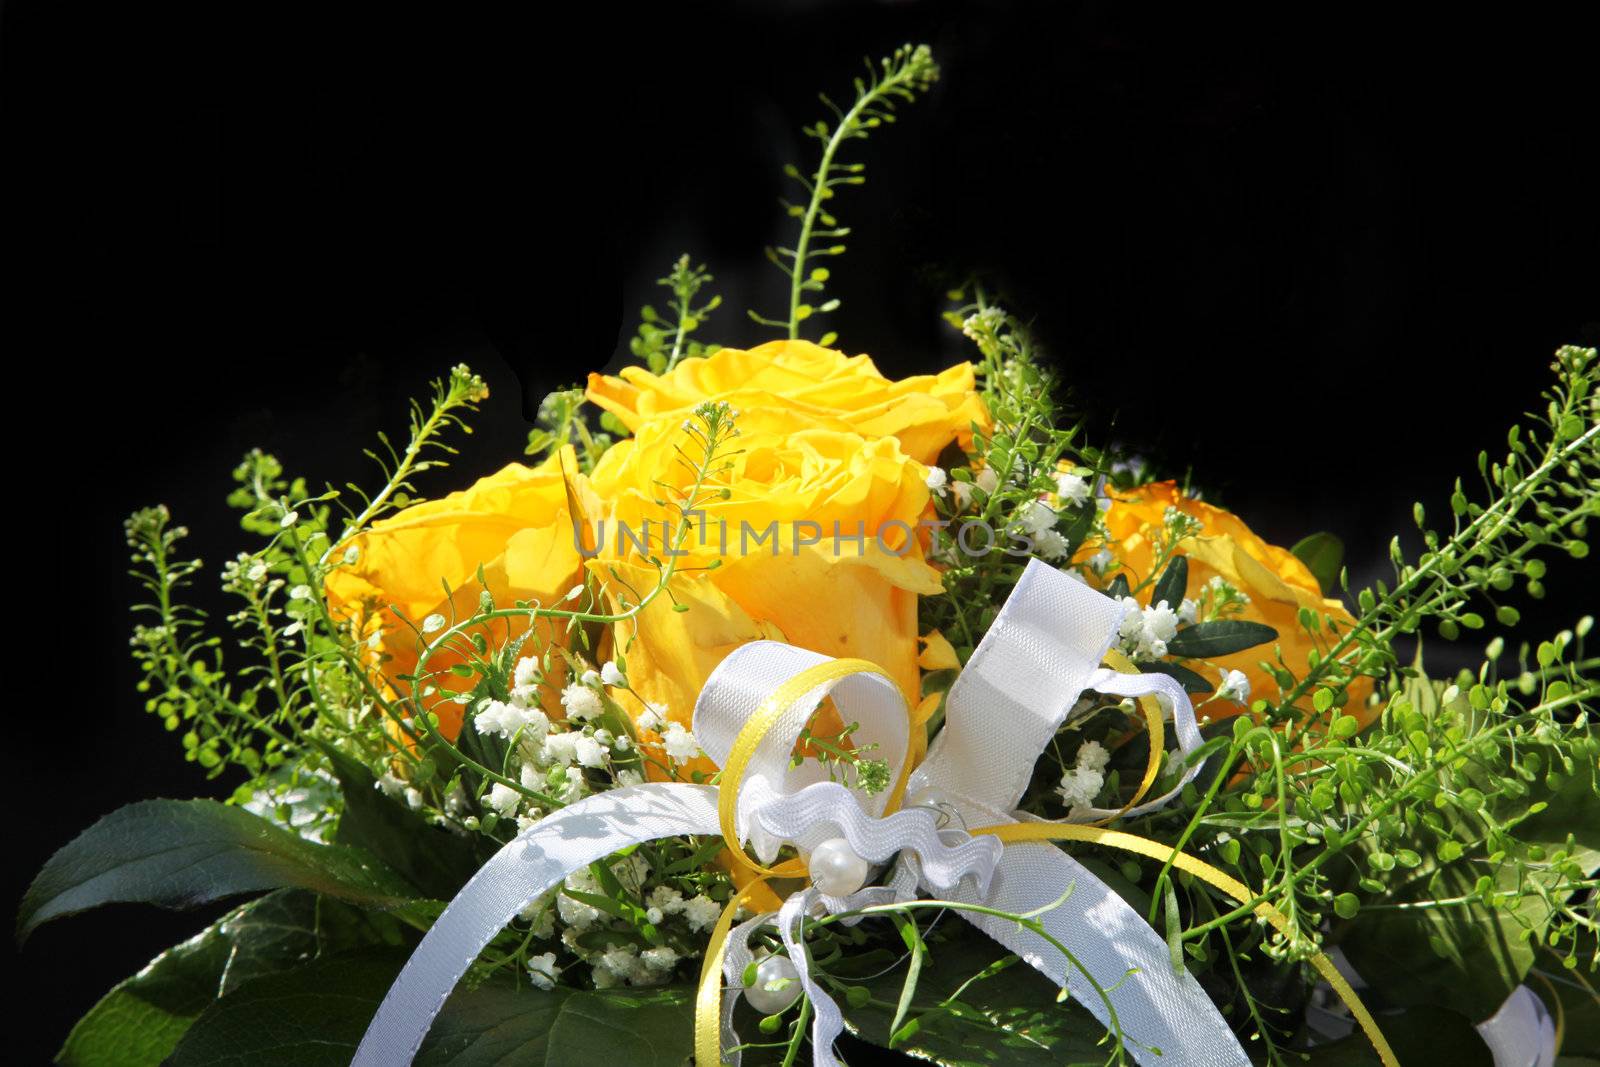 A bouquet of yellow flowers with a decorative white ribbon, close-up